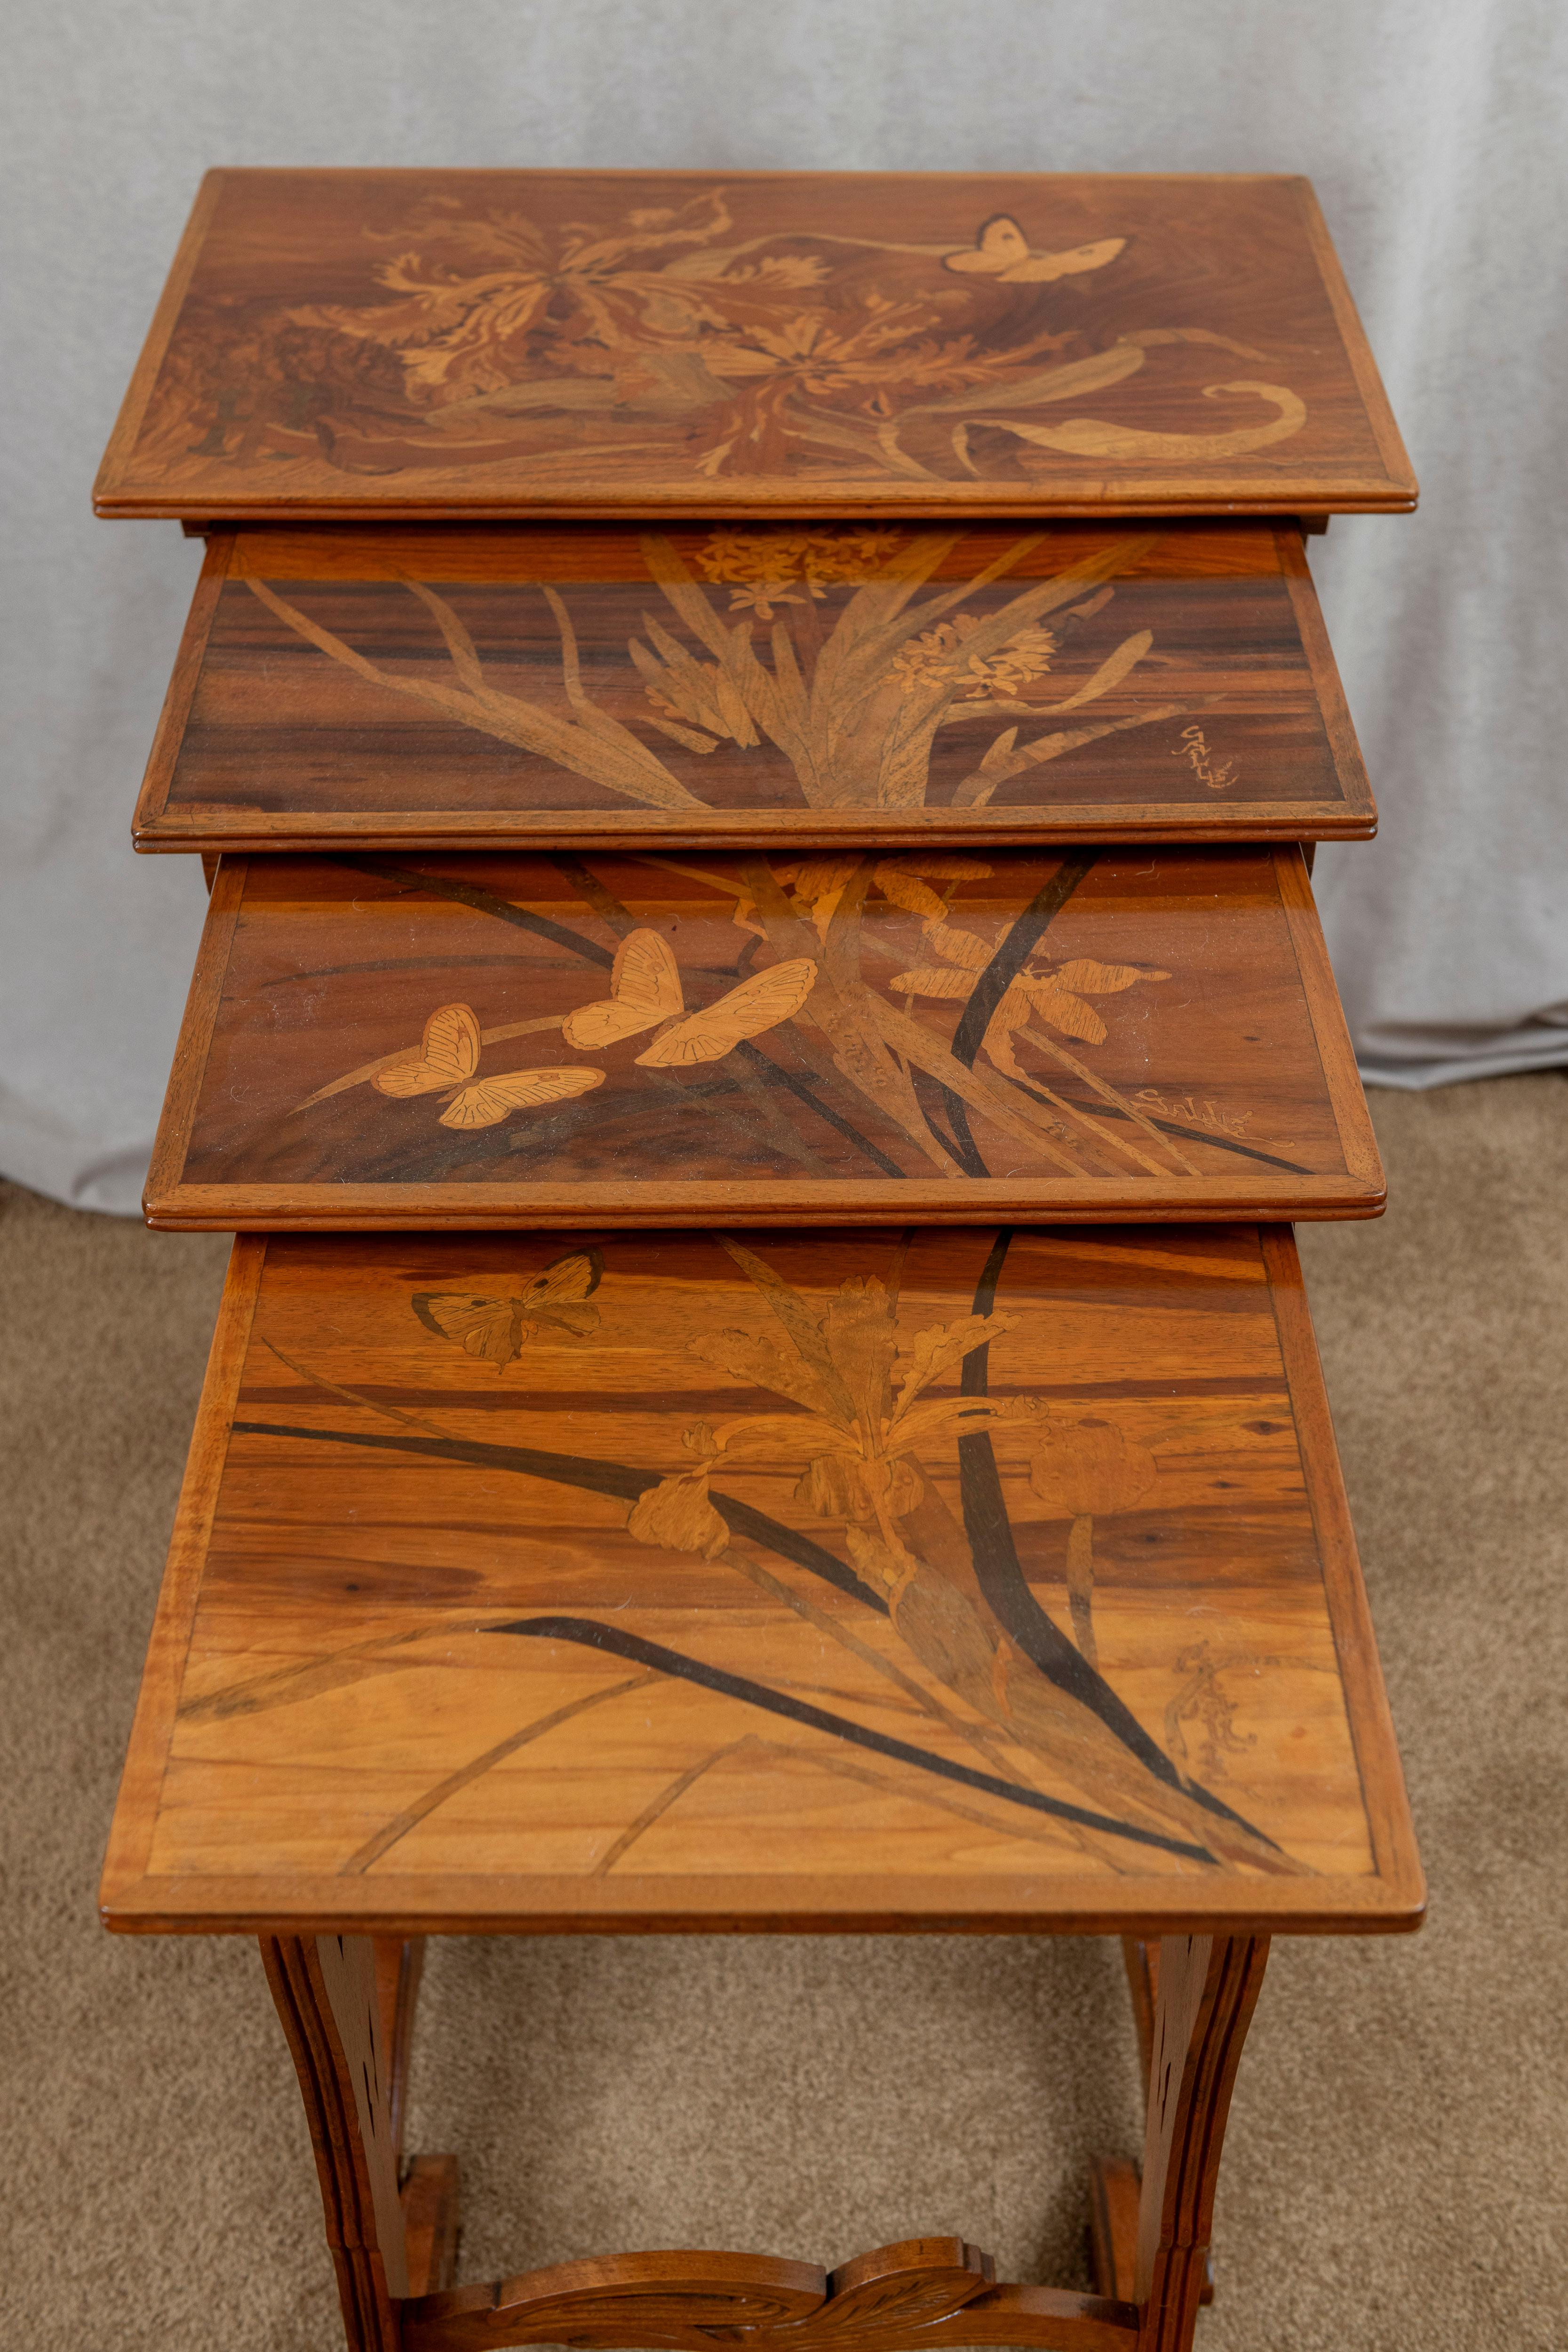   These fabulous art nouveau period tables were made by the noted French artist Emile Gallé. Known for his beautiful glass works and his furniture, his commitment to quality is easy to spot. The marquetry on these tables is colorful and organic.